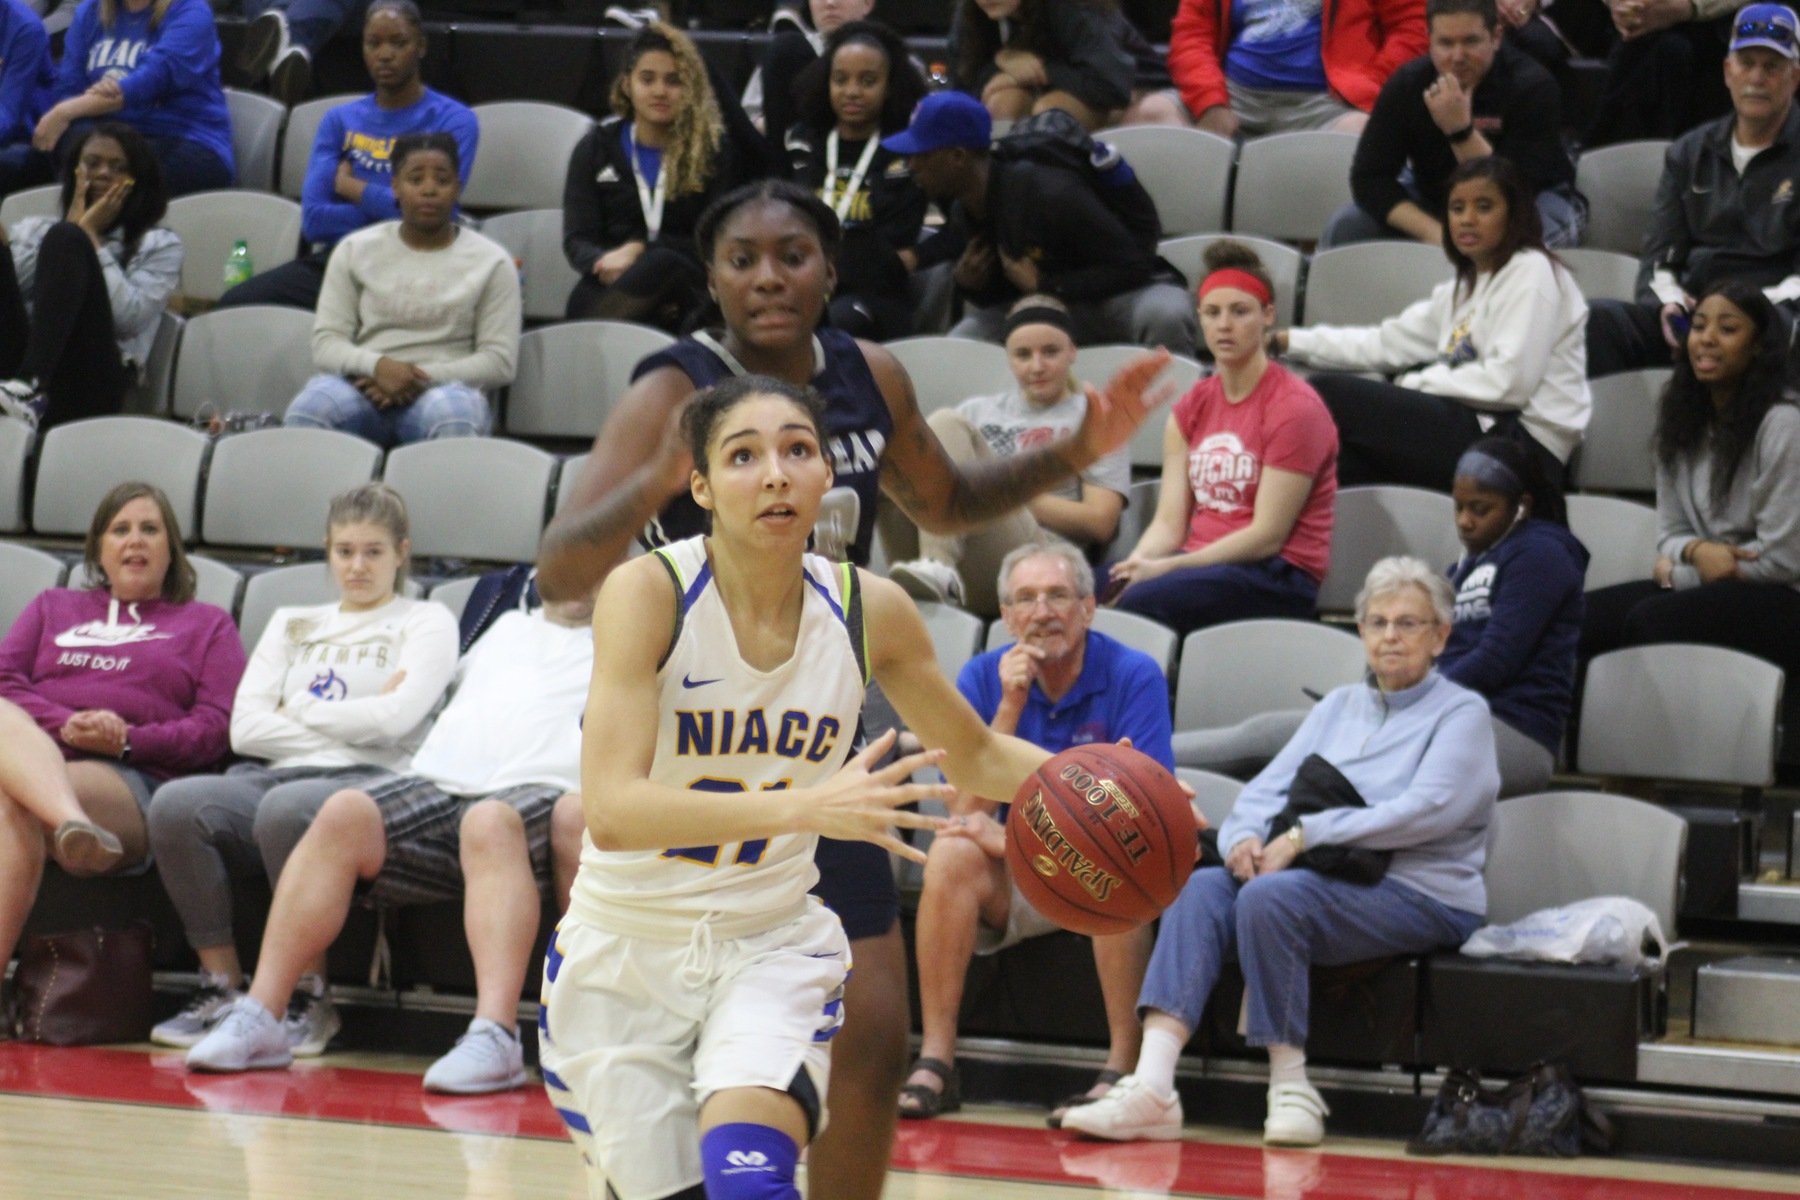 NIACC's Jada Buford drives to the basket in second half of Wednesday's game against Cape Fear CC at the national tournament.